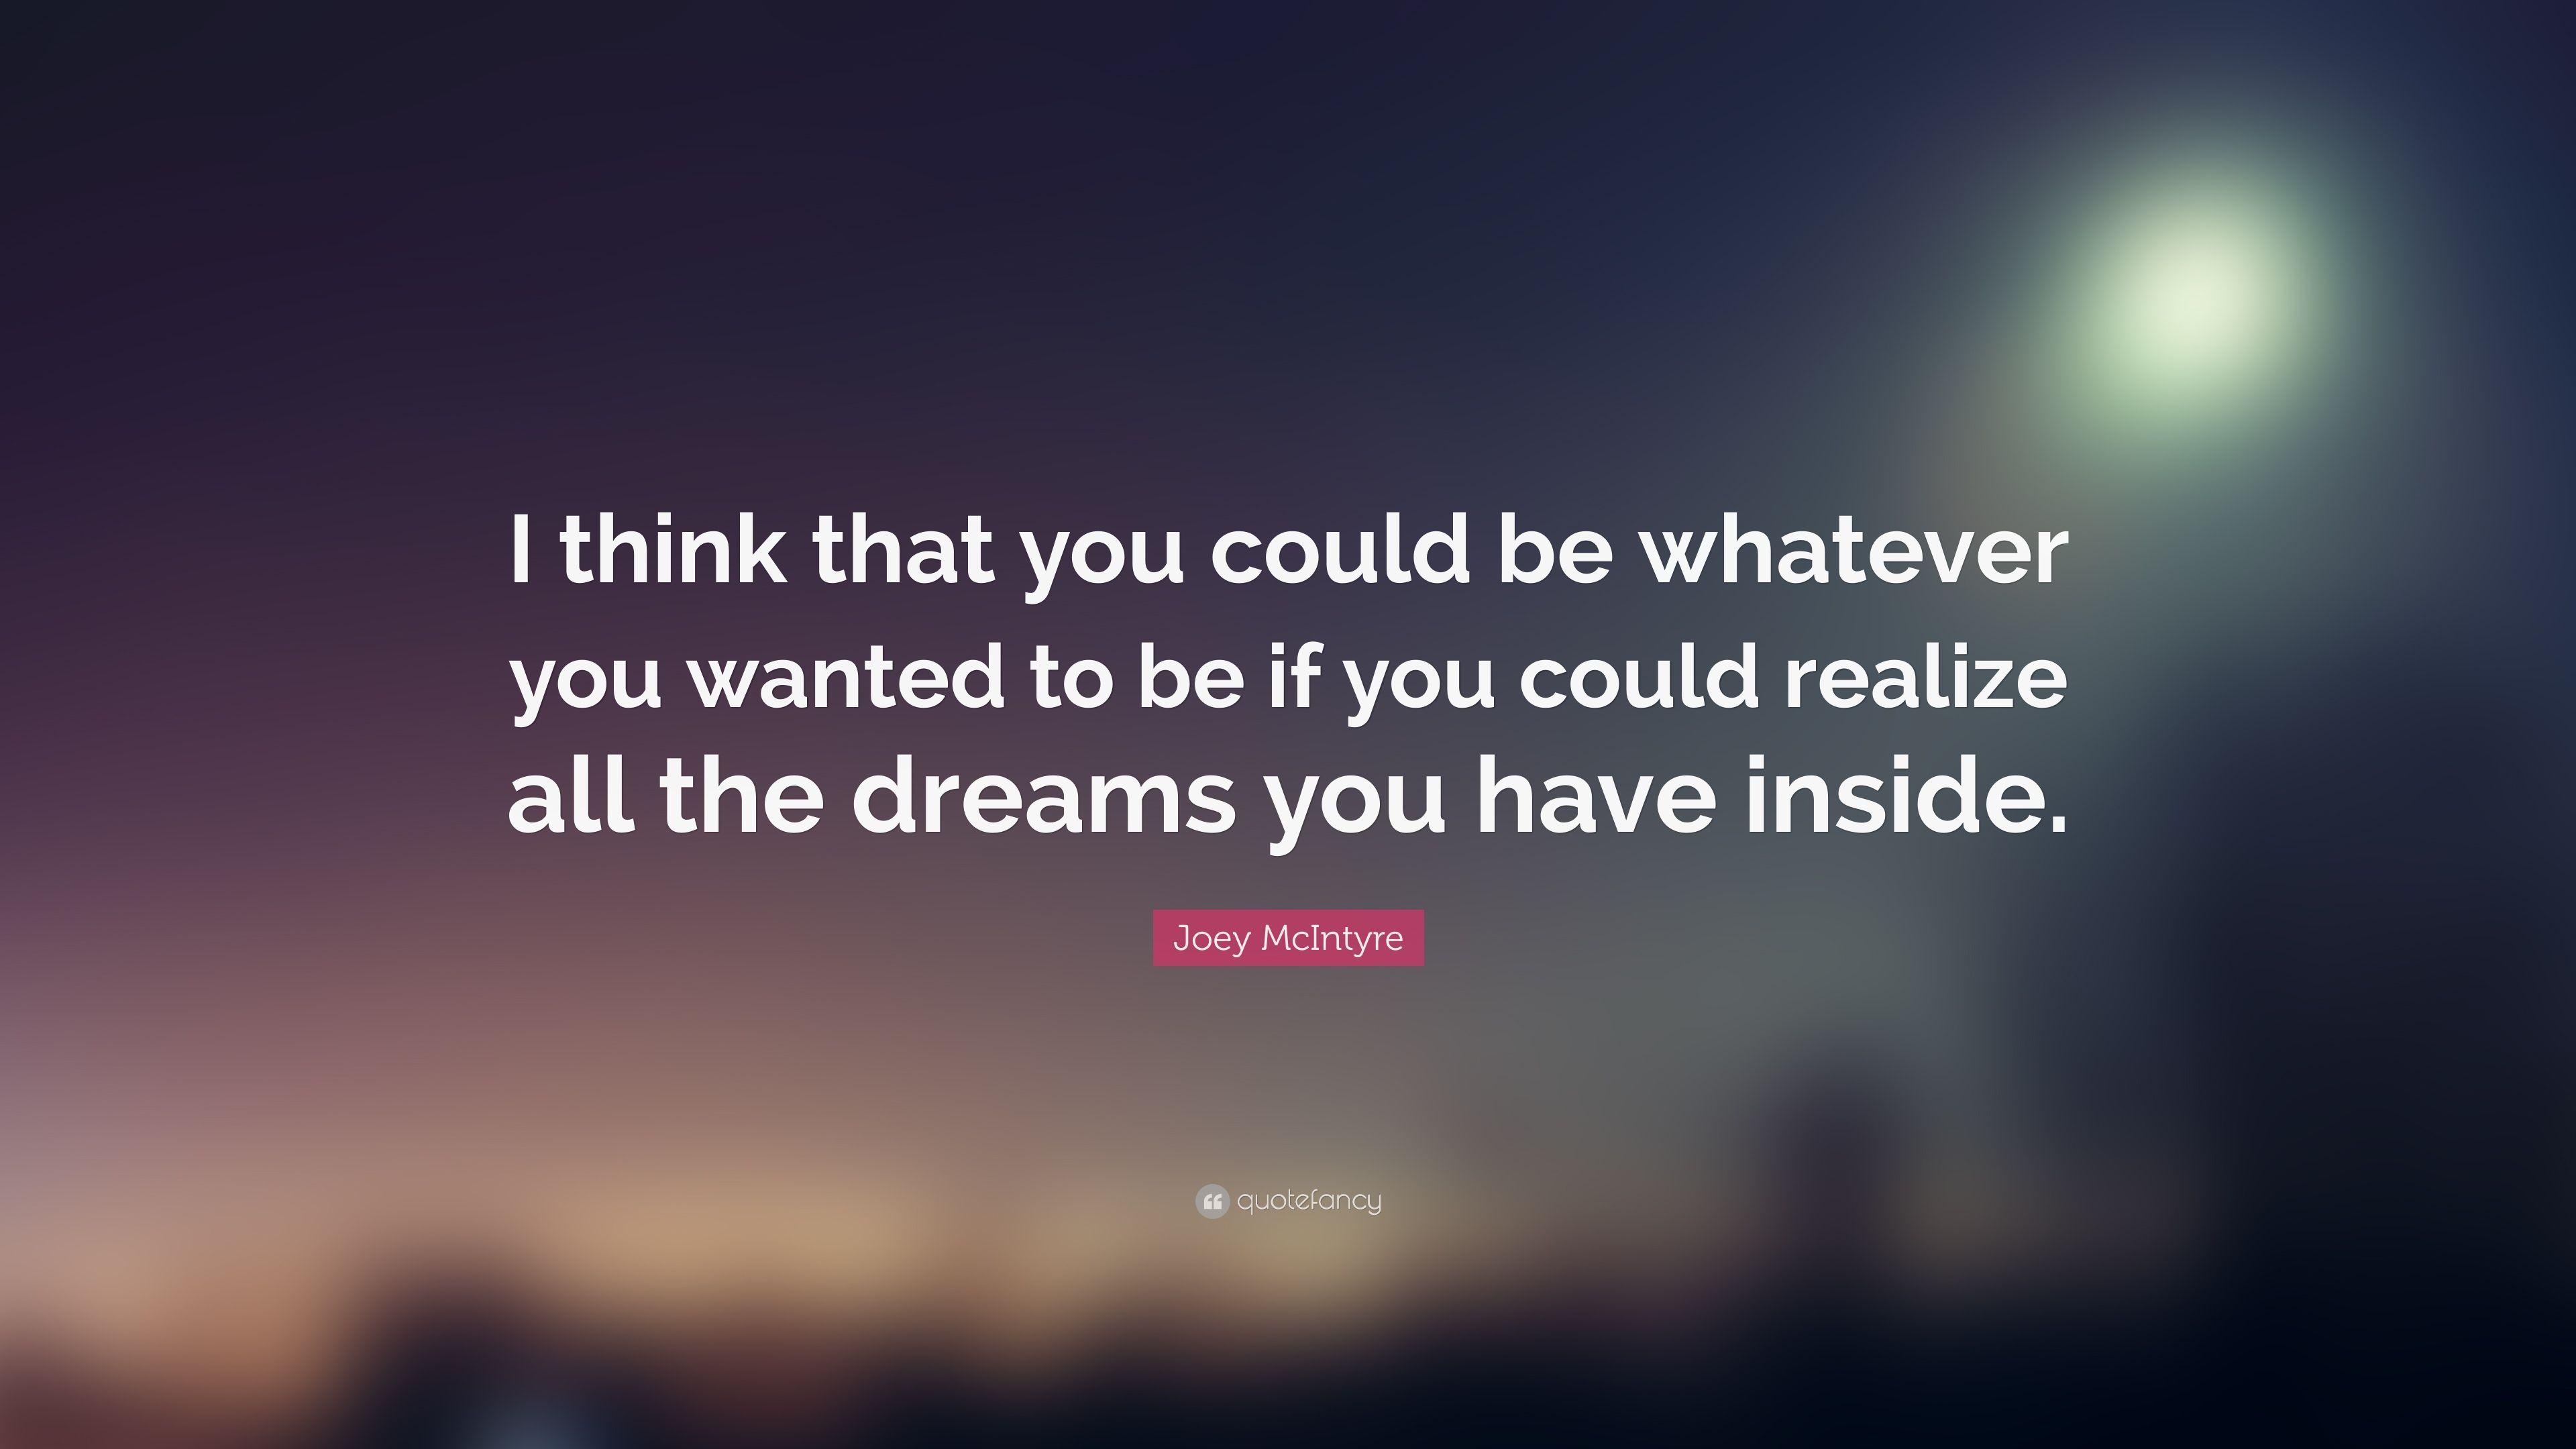 Joey McIntyre Quote: “I think that you could be whatever you wanted